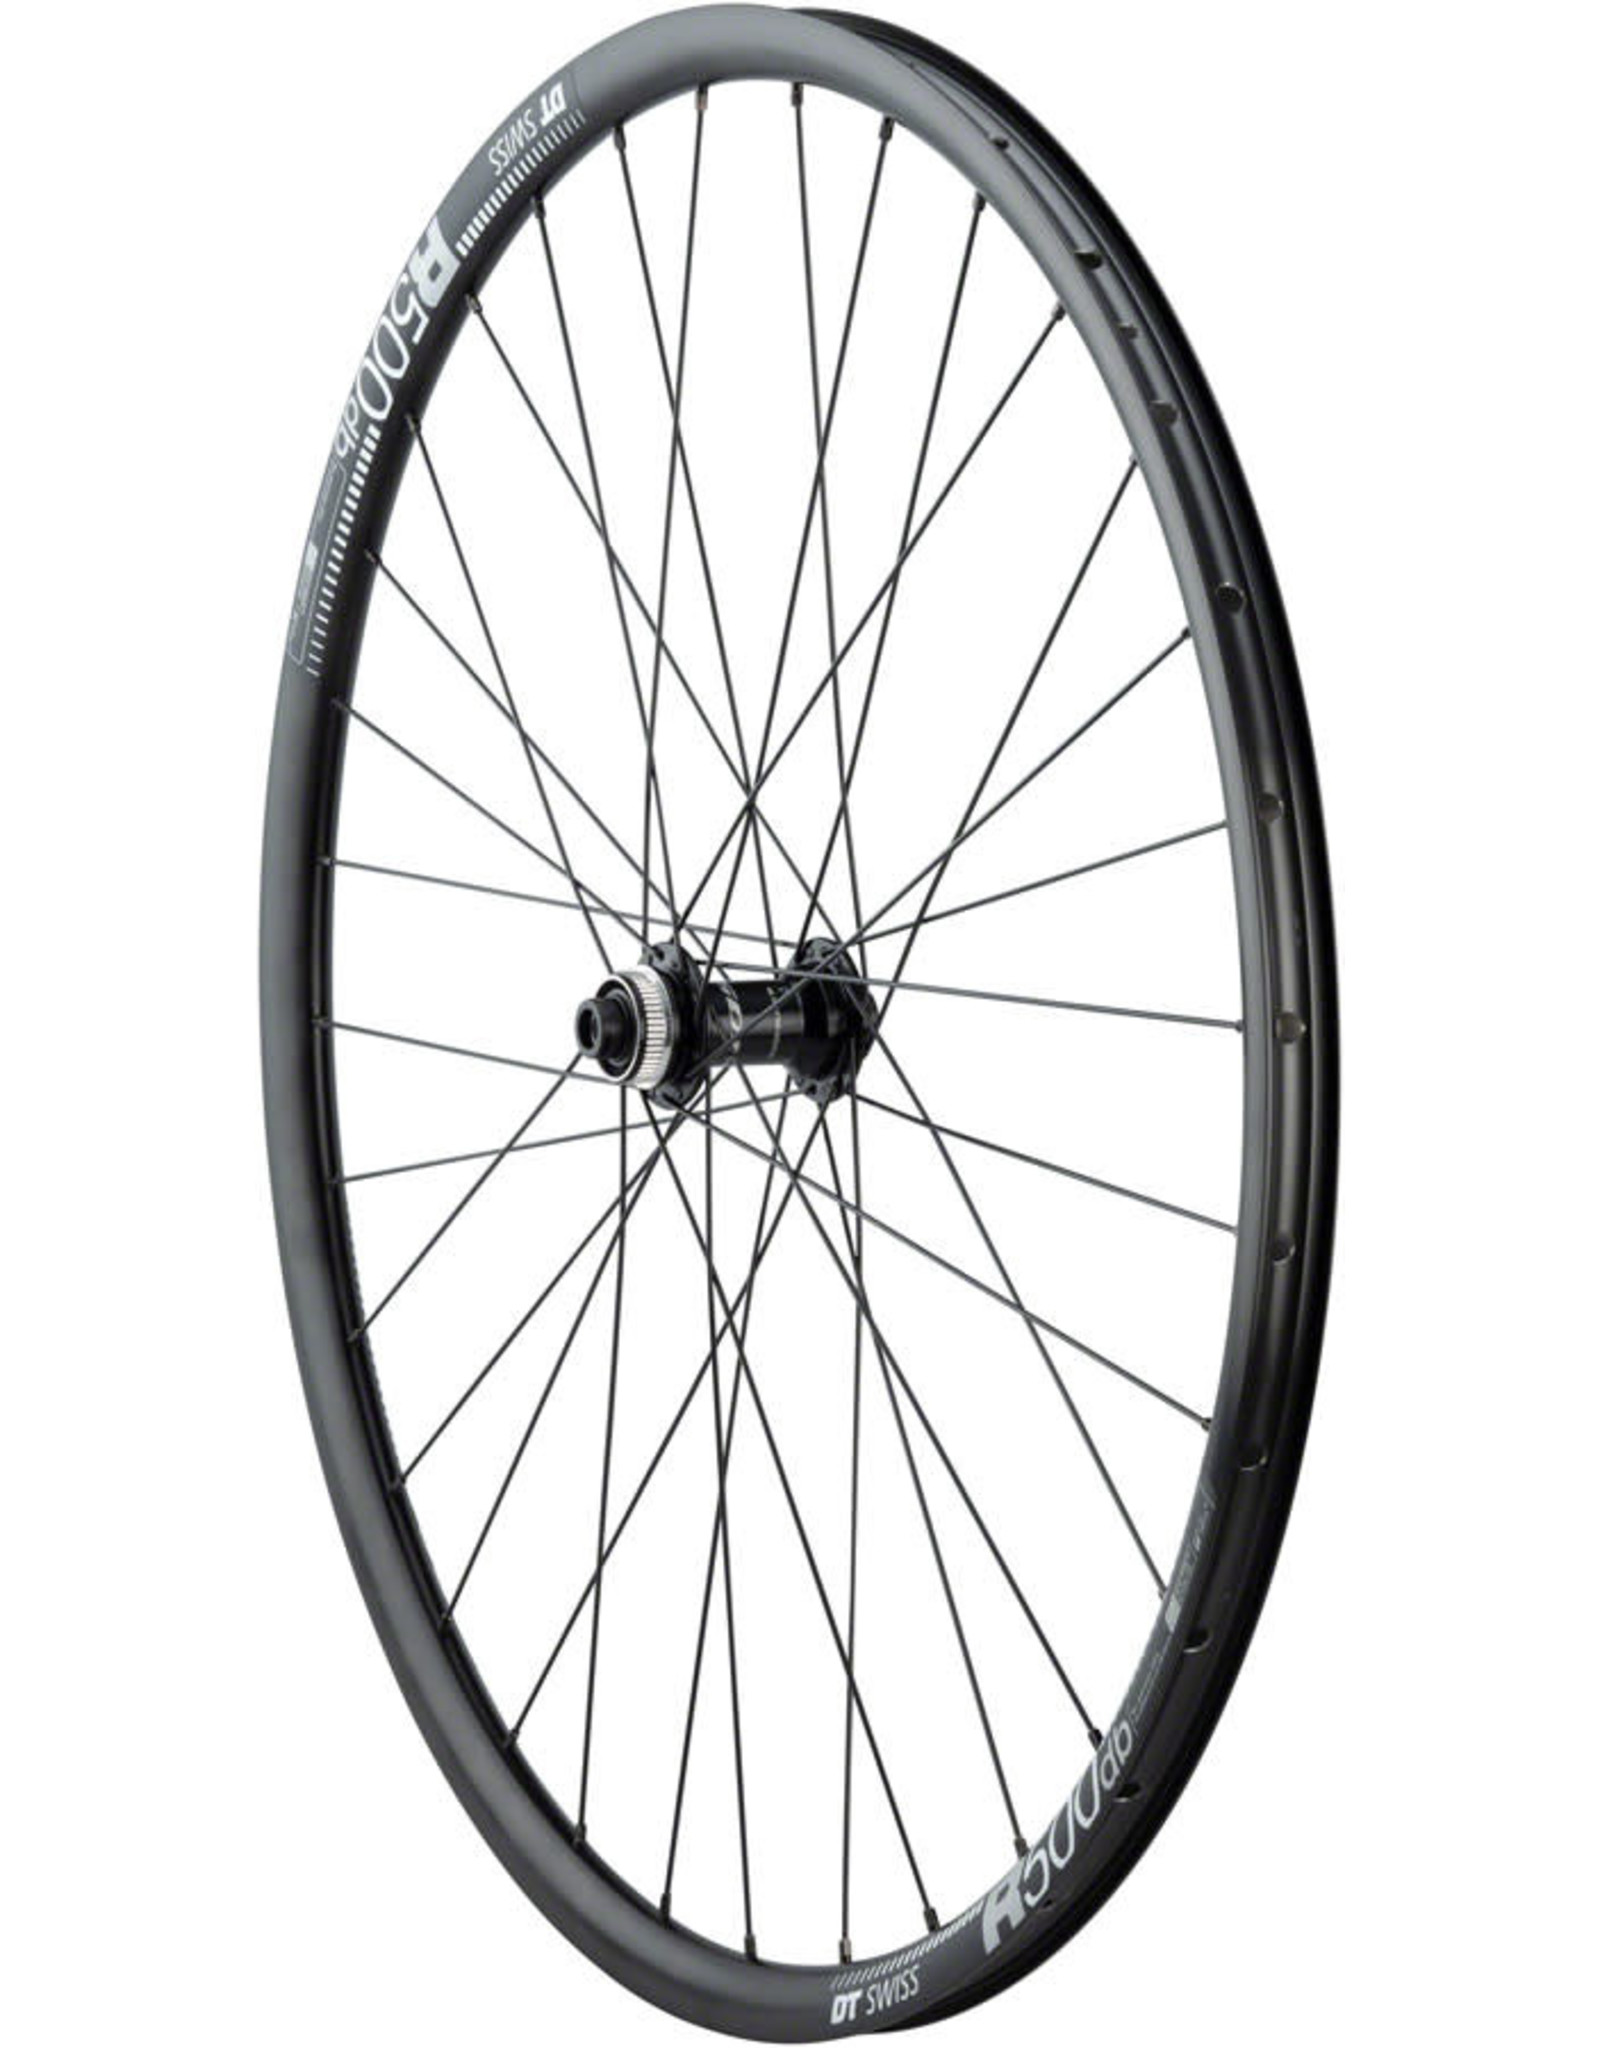 Quality Wheels Shimano RS505/DT Swiss R500 Disc - 700, 12 x 100mm, Center-Lock, Black, Front Wheel